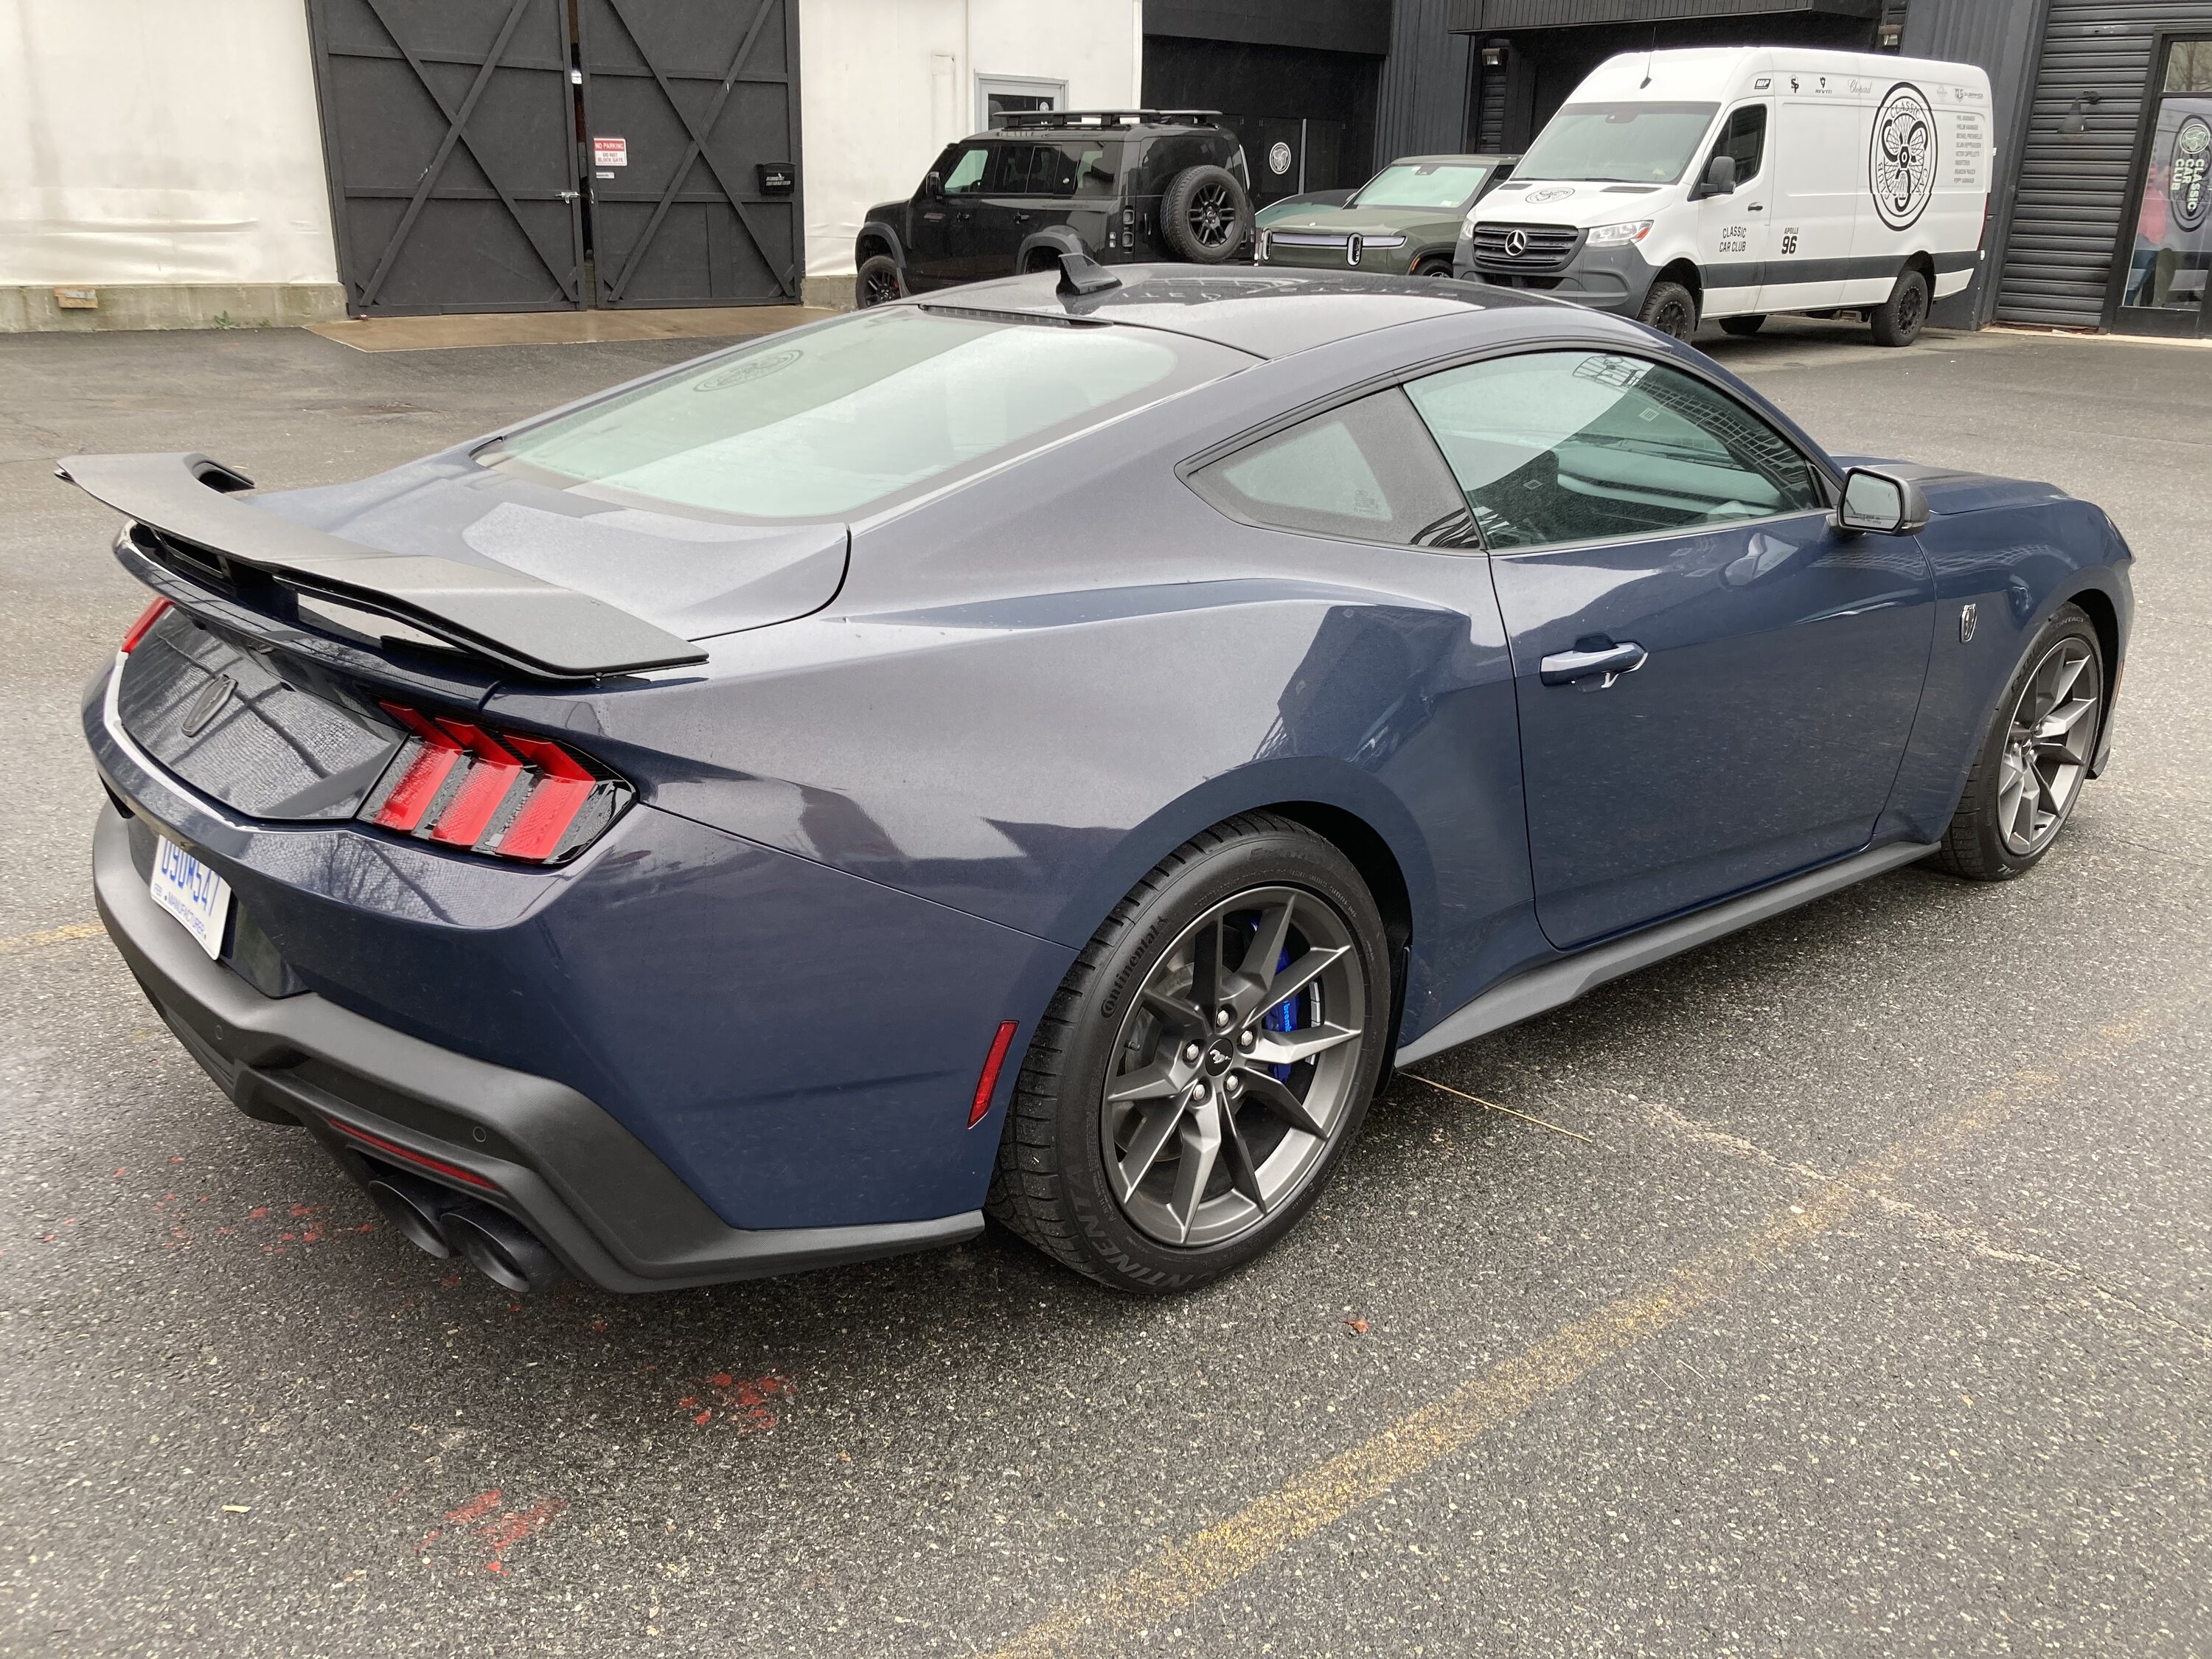 S650 Mustang Video: First Listen of Dark Horse Mustang WOT Driving on Public Roads + Blue Ember / Grabber Blue in Natural Lighting 21638999-F4A2-4107-8372-7ACCBA10B911